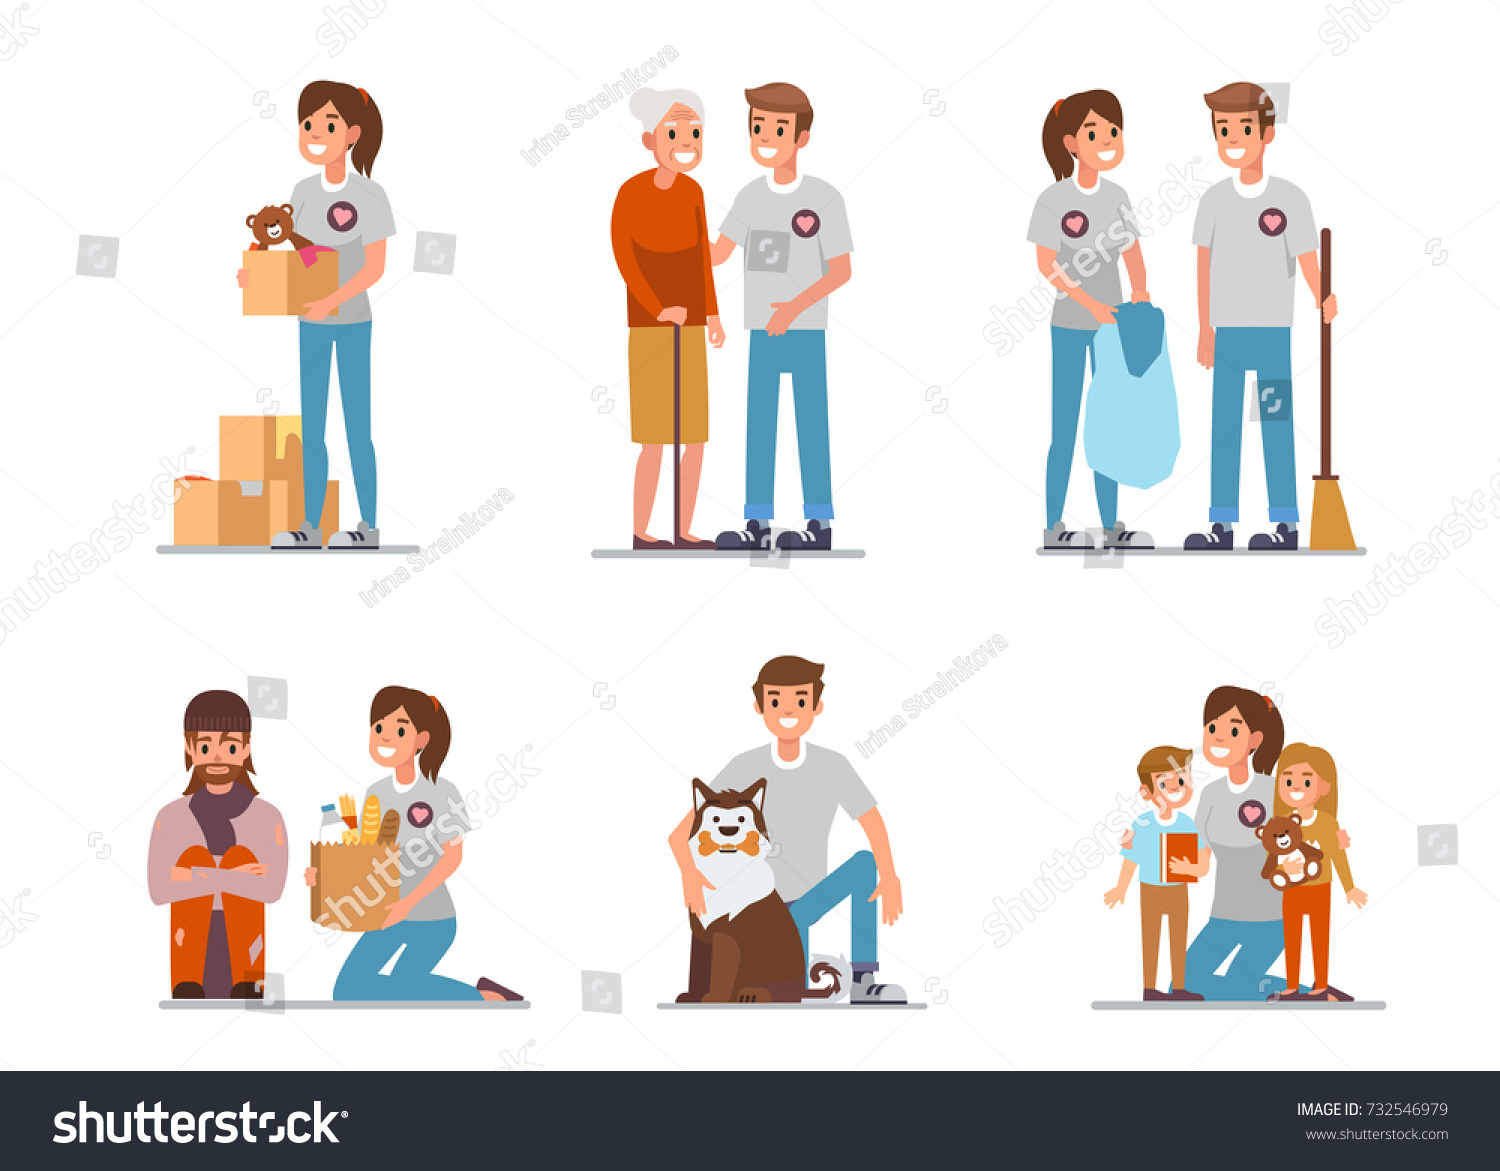 SVG of Volunteers at work. Flat style vector illustration isolated on white background. svg